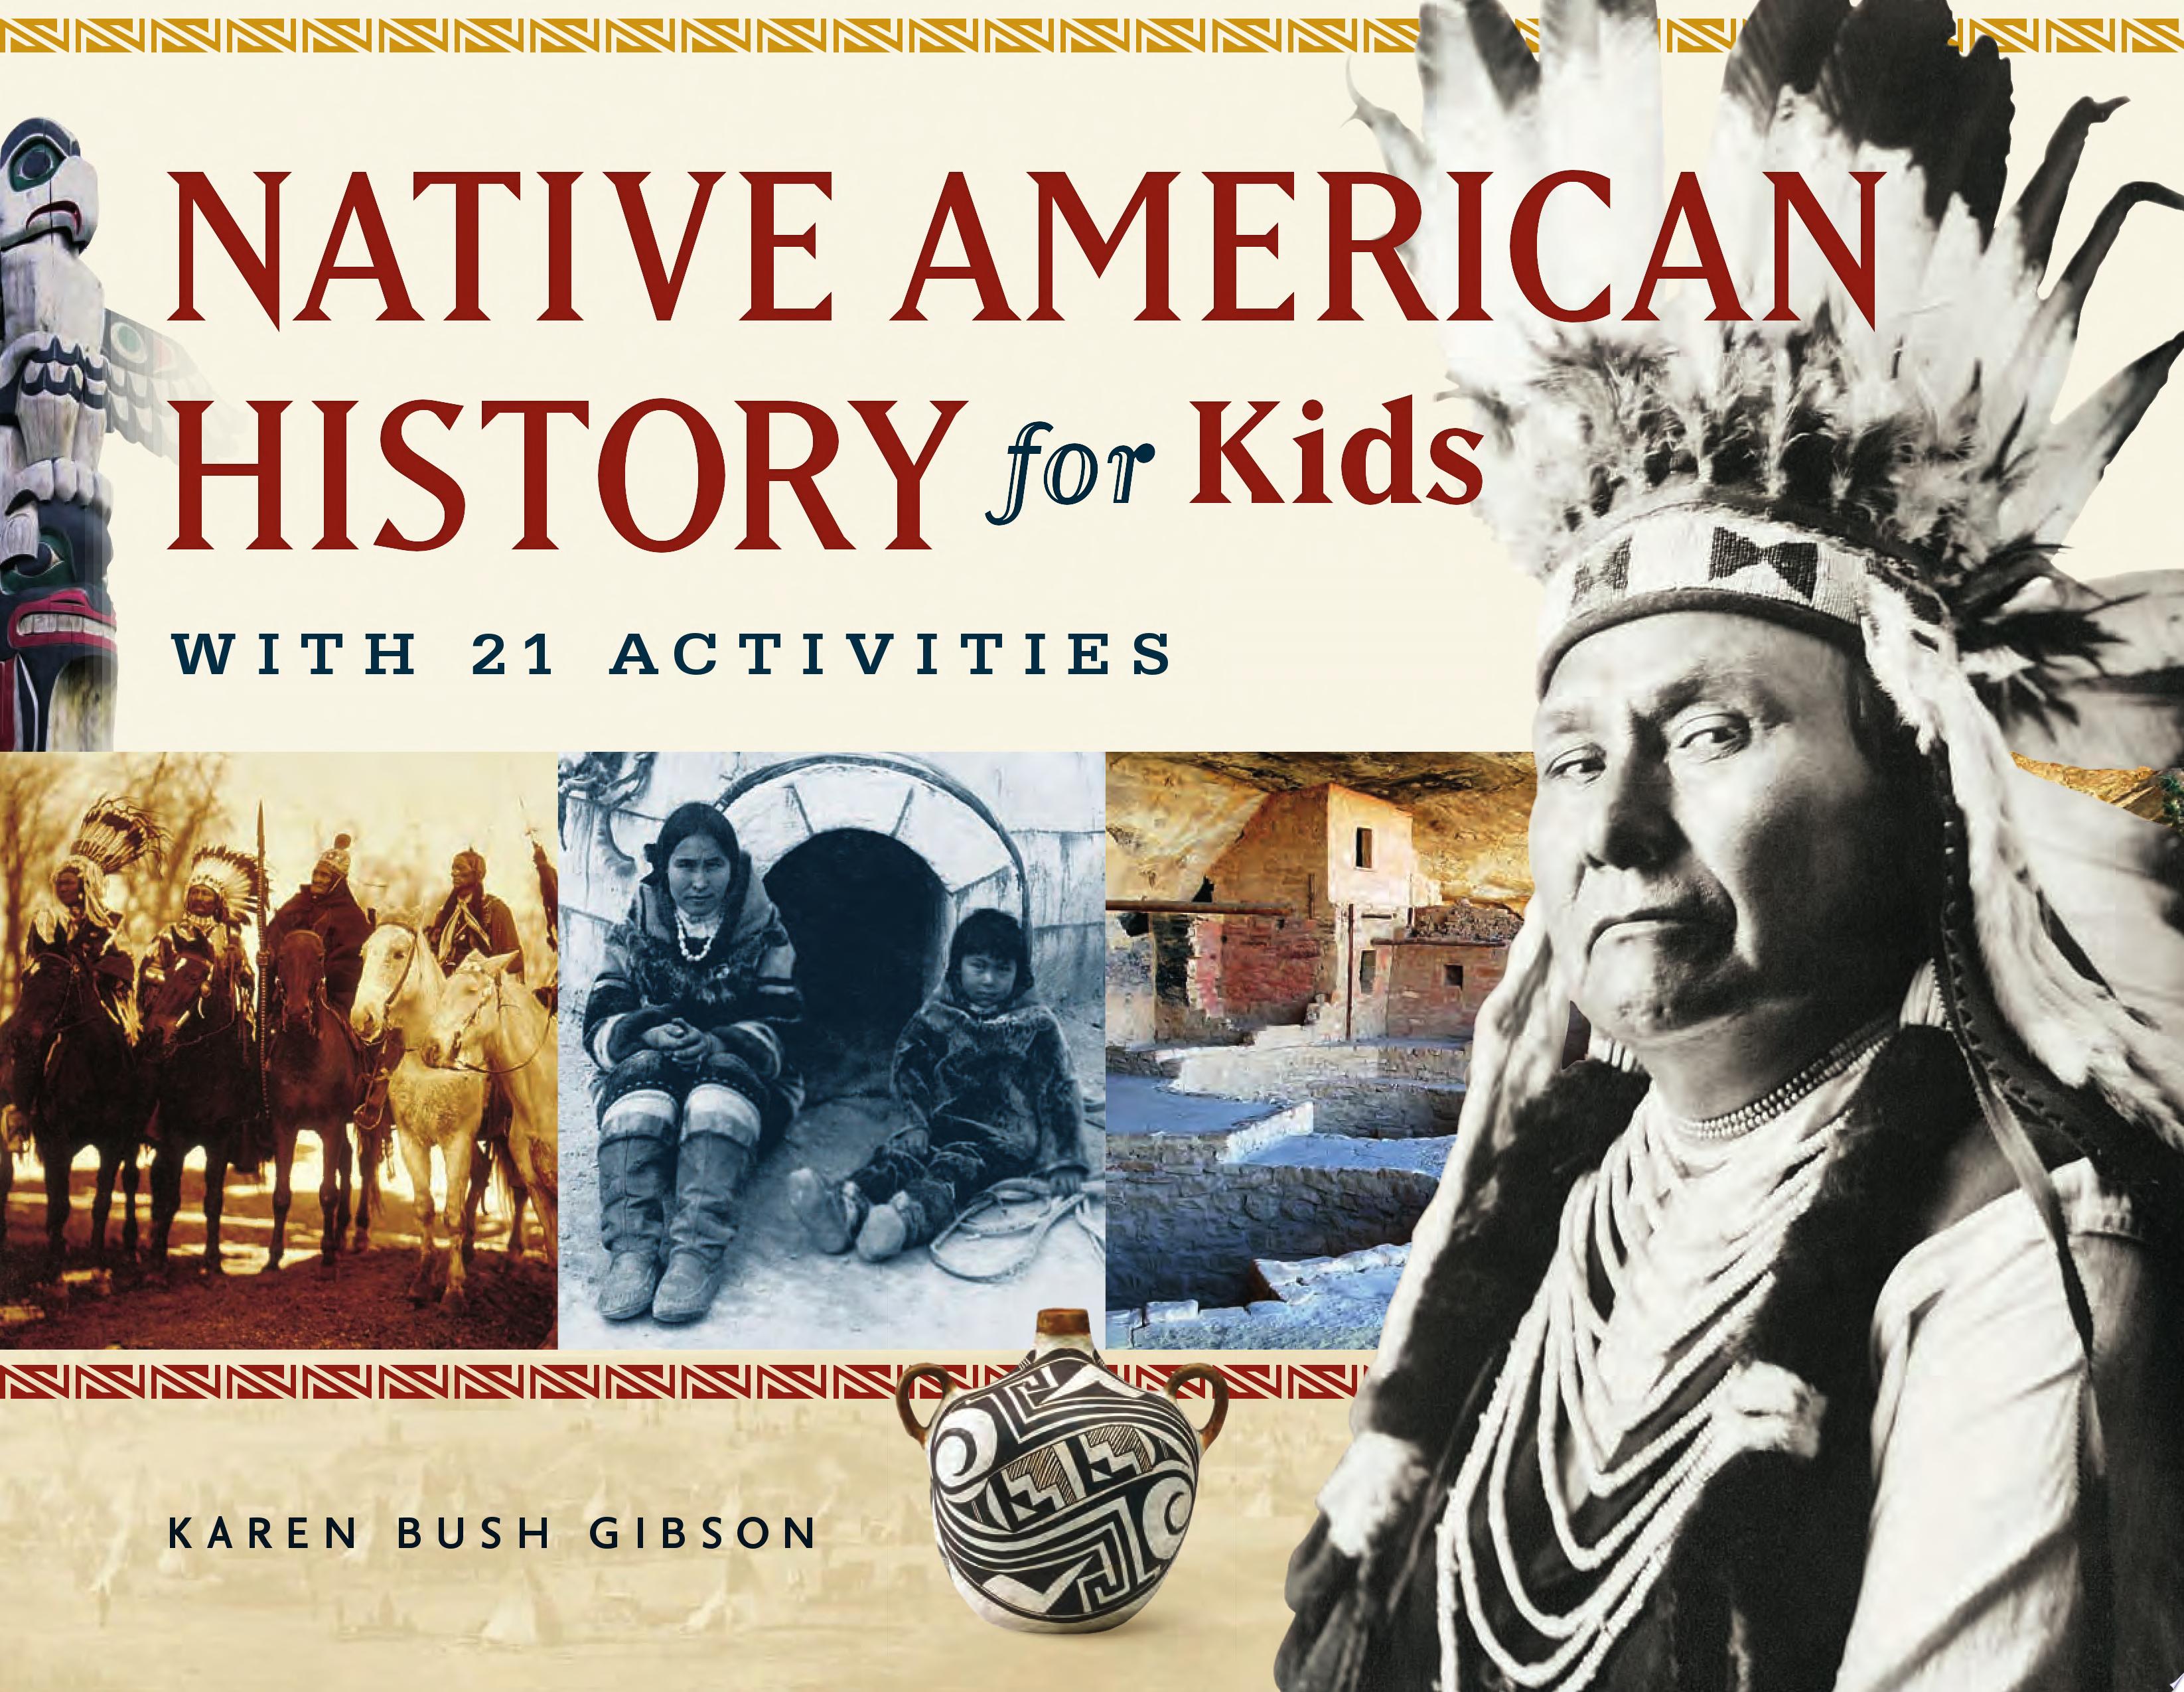 Image for "Native American History for Kids"